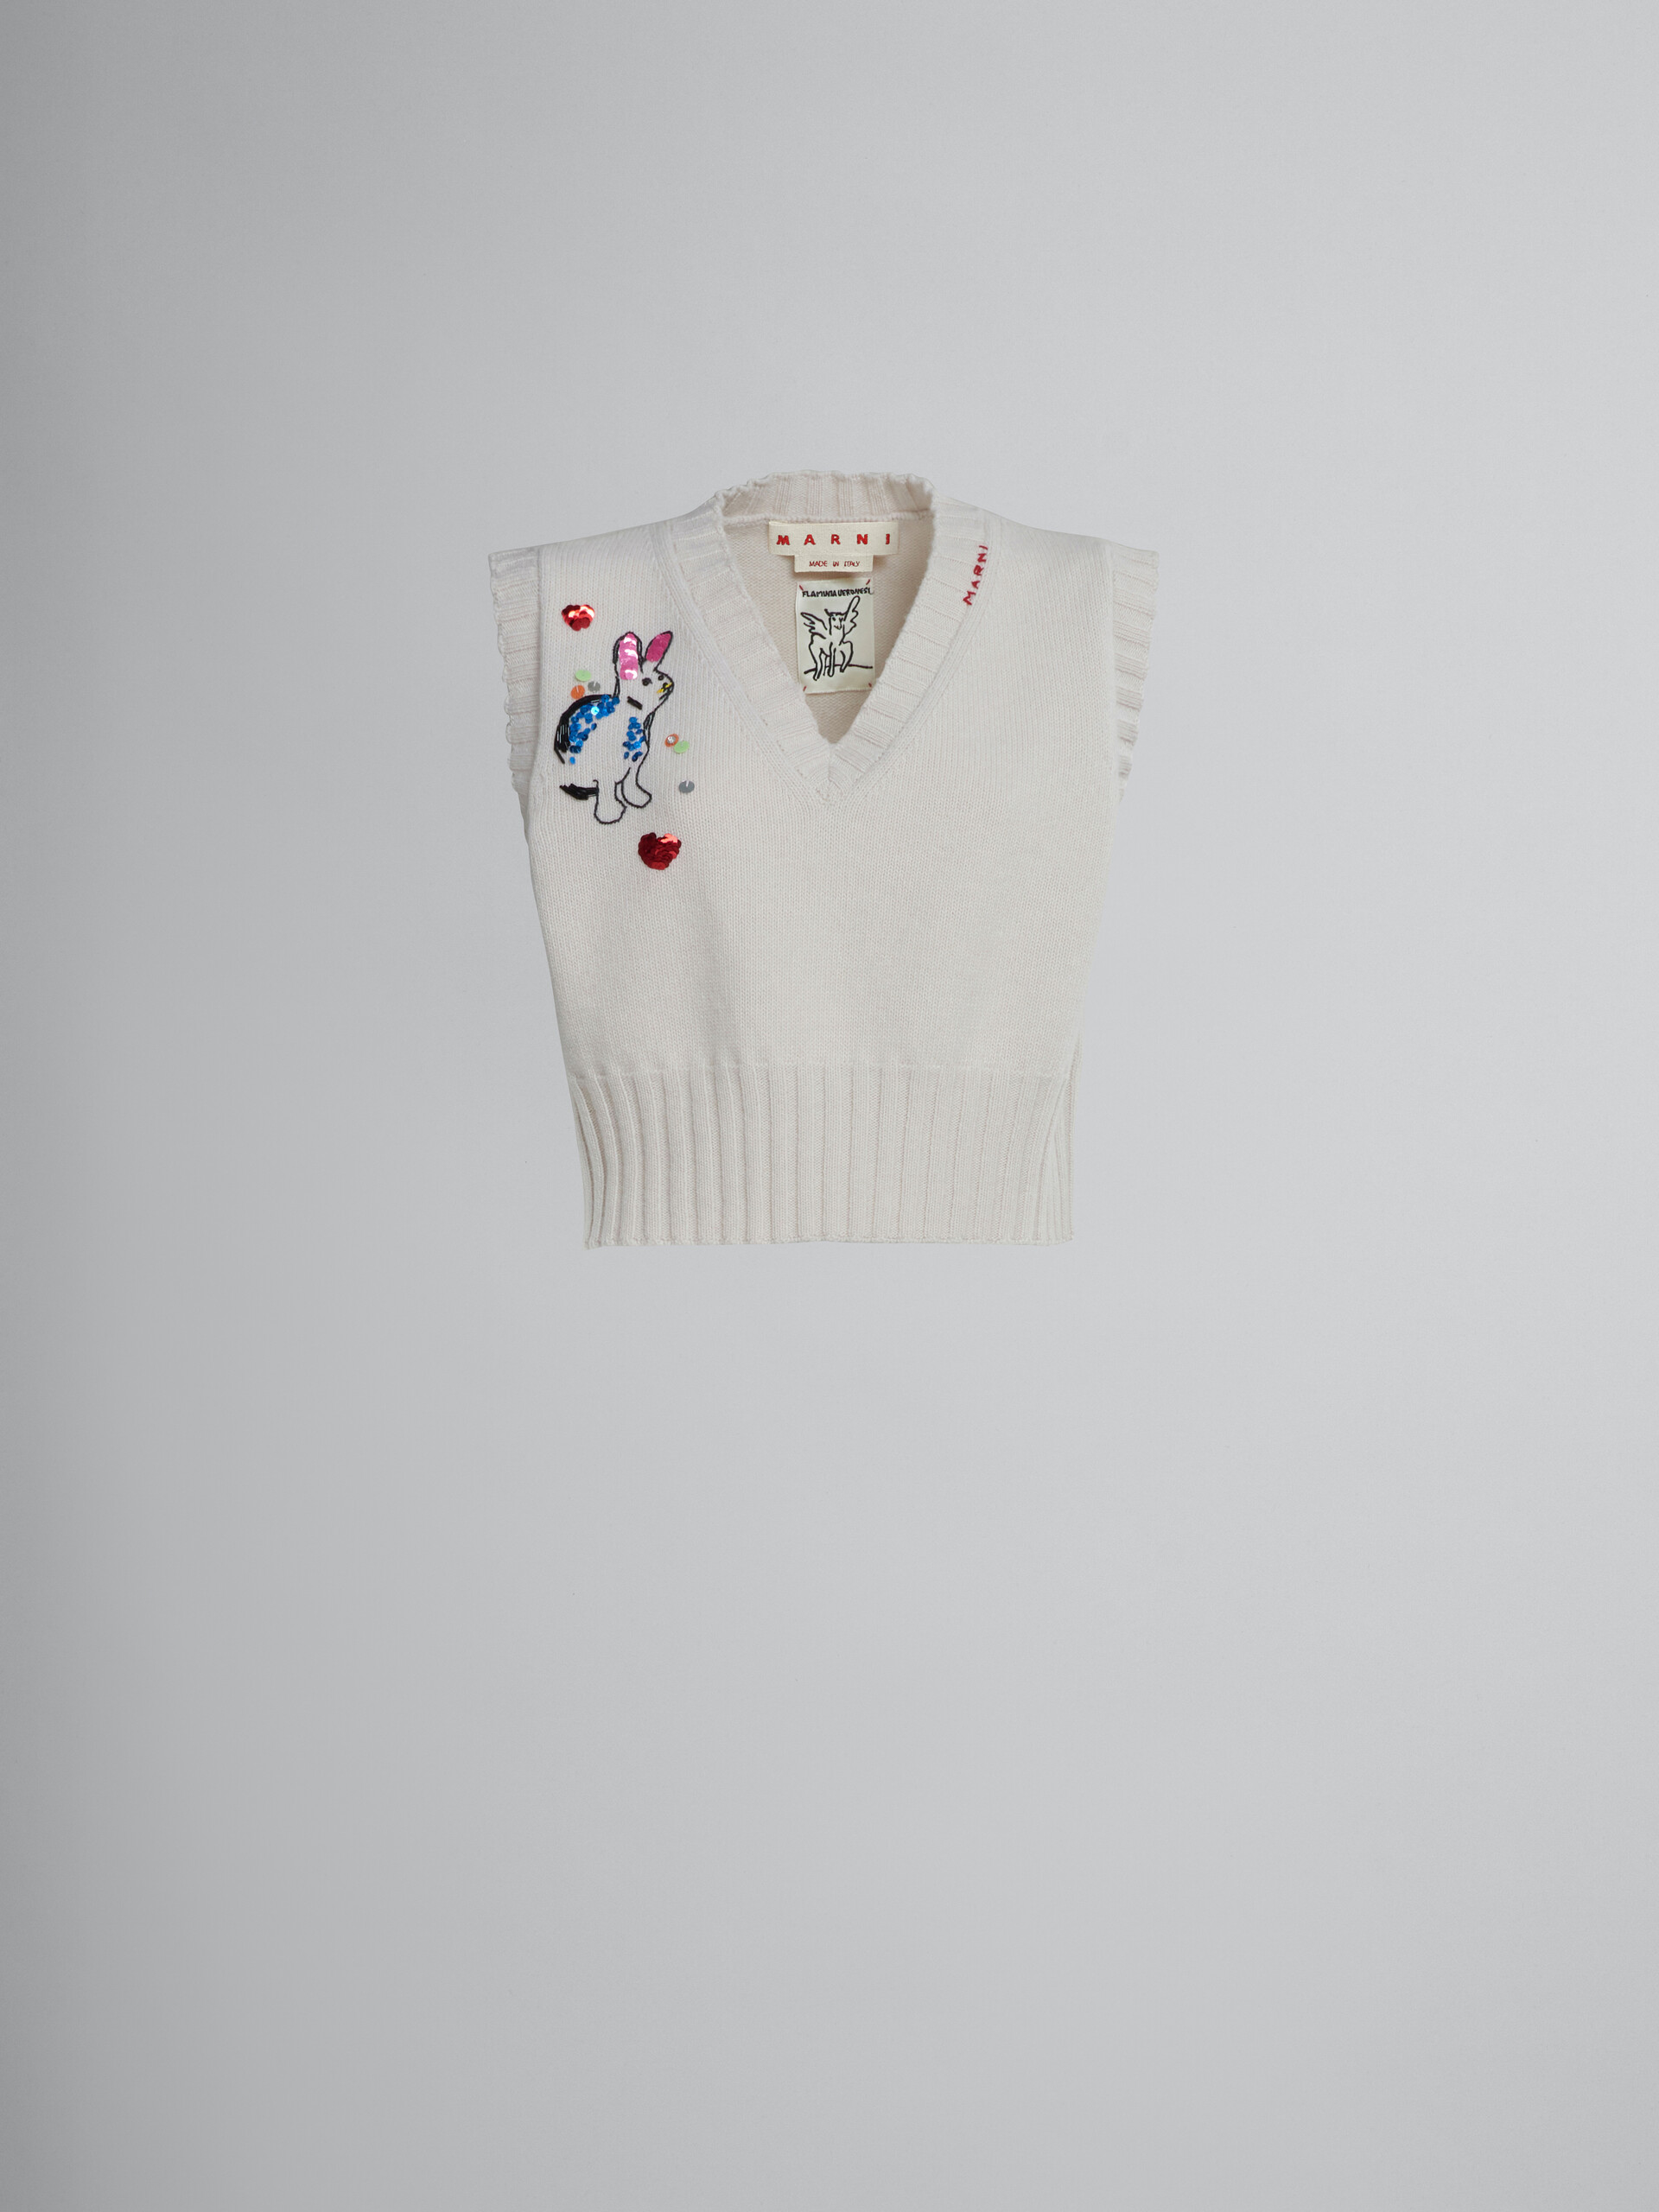 Sweater vest with rabbit embroidery - Pullovers - Image 1